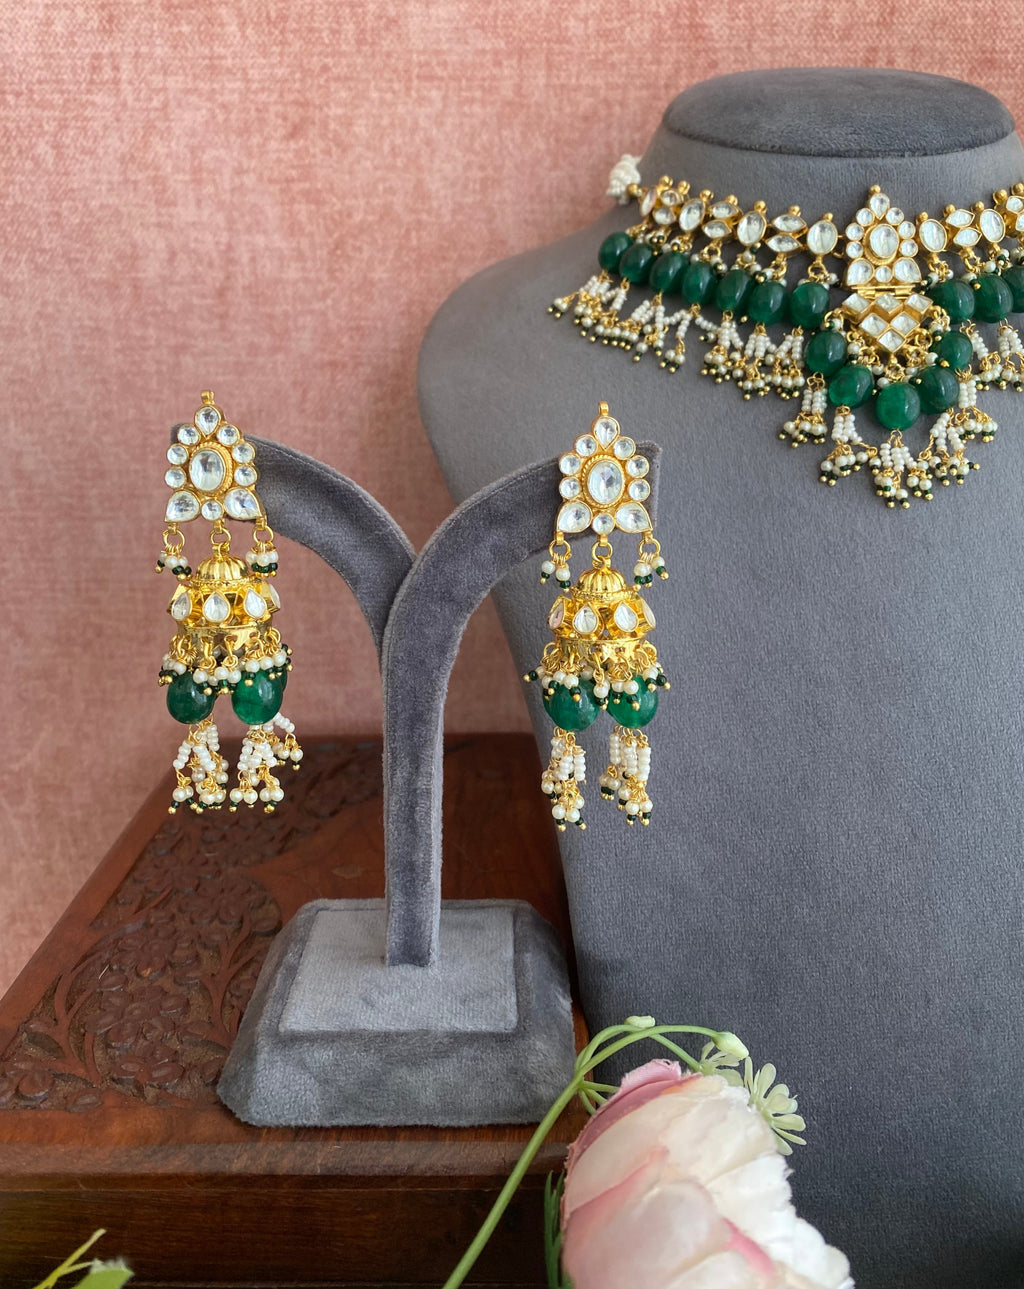 Kundan necklace set with green drops